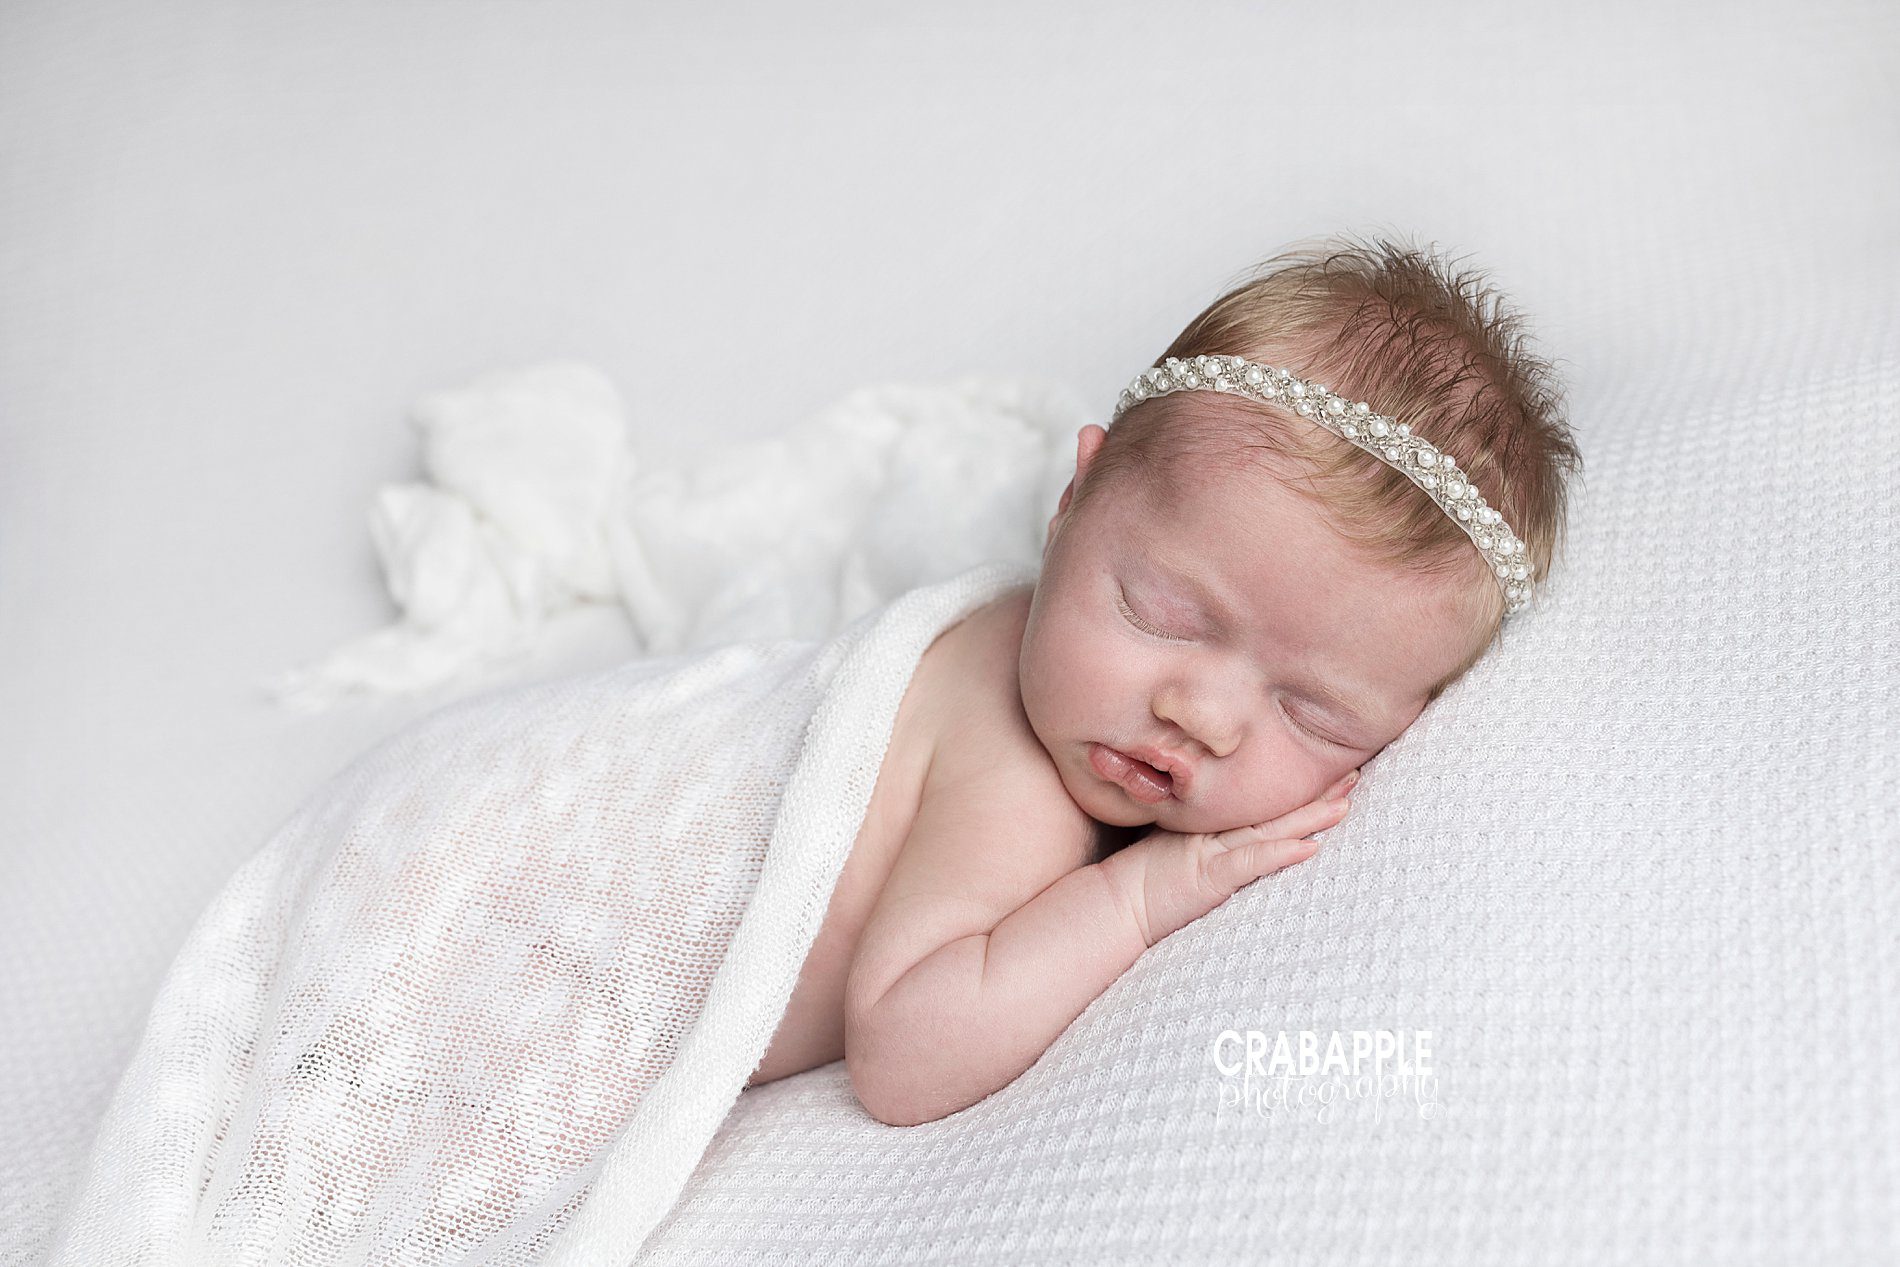 Clean and simple newborn photo ideas using white